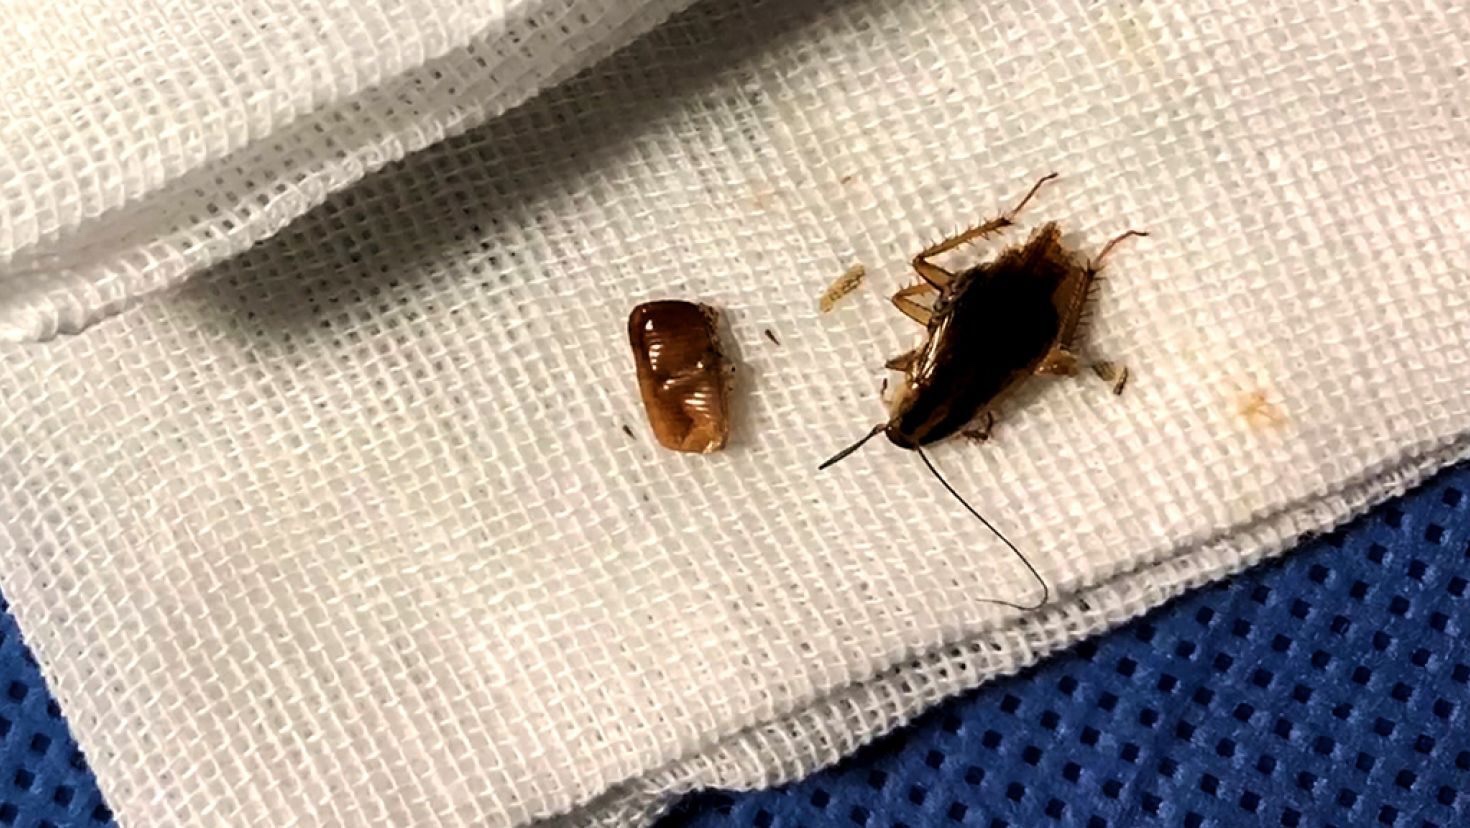 Group Of Cockroaches Discovered Living Inside Man’s Ear